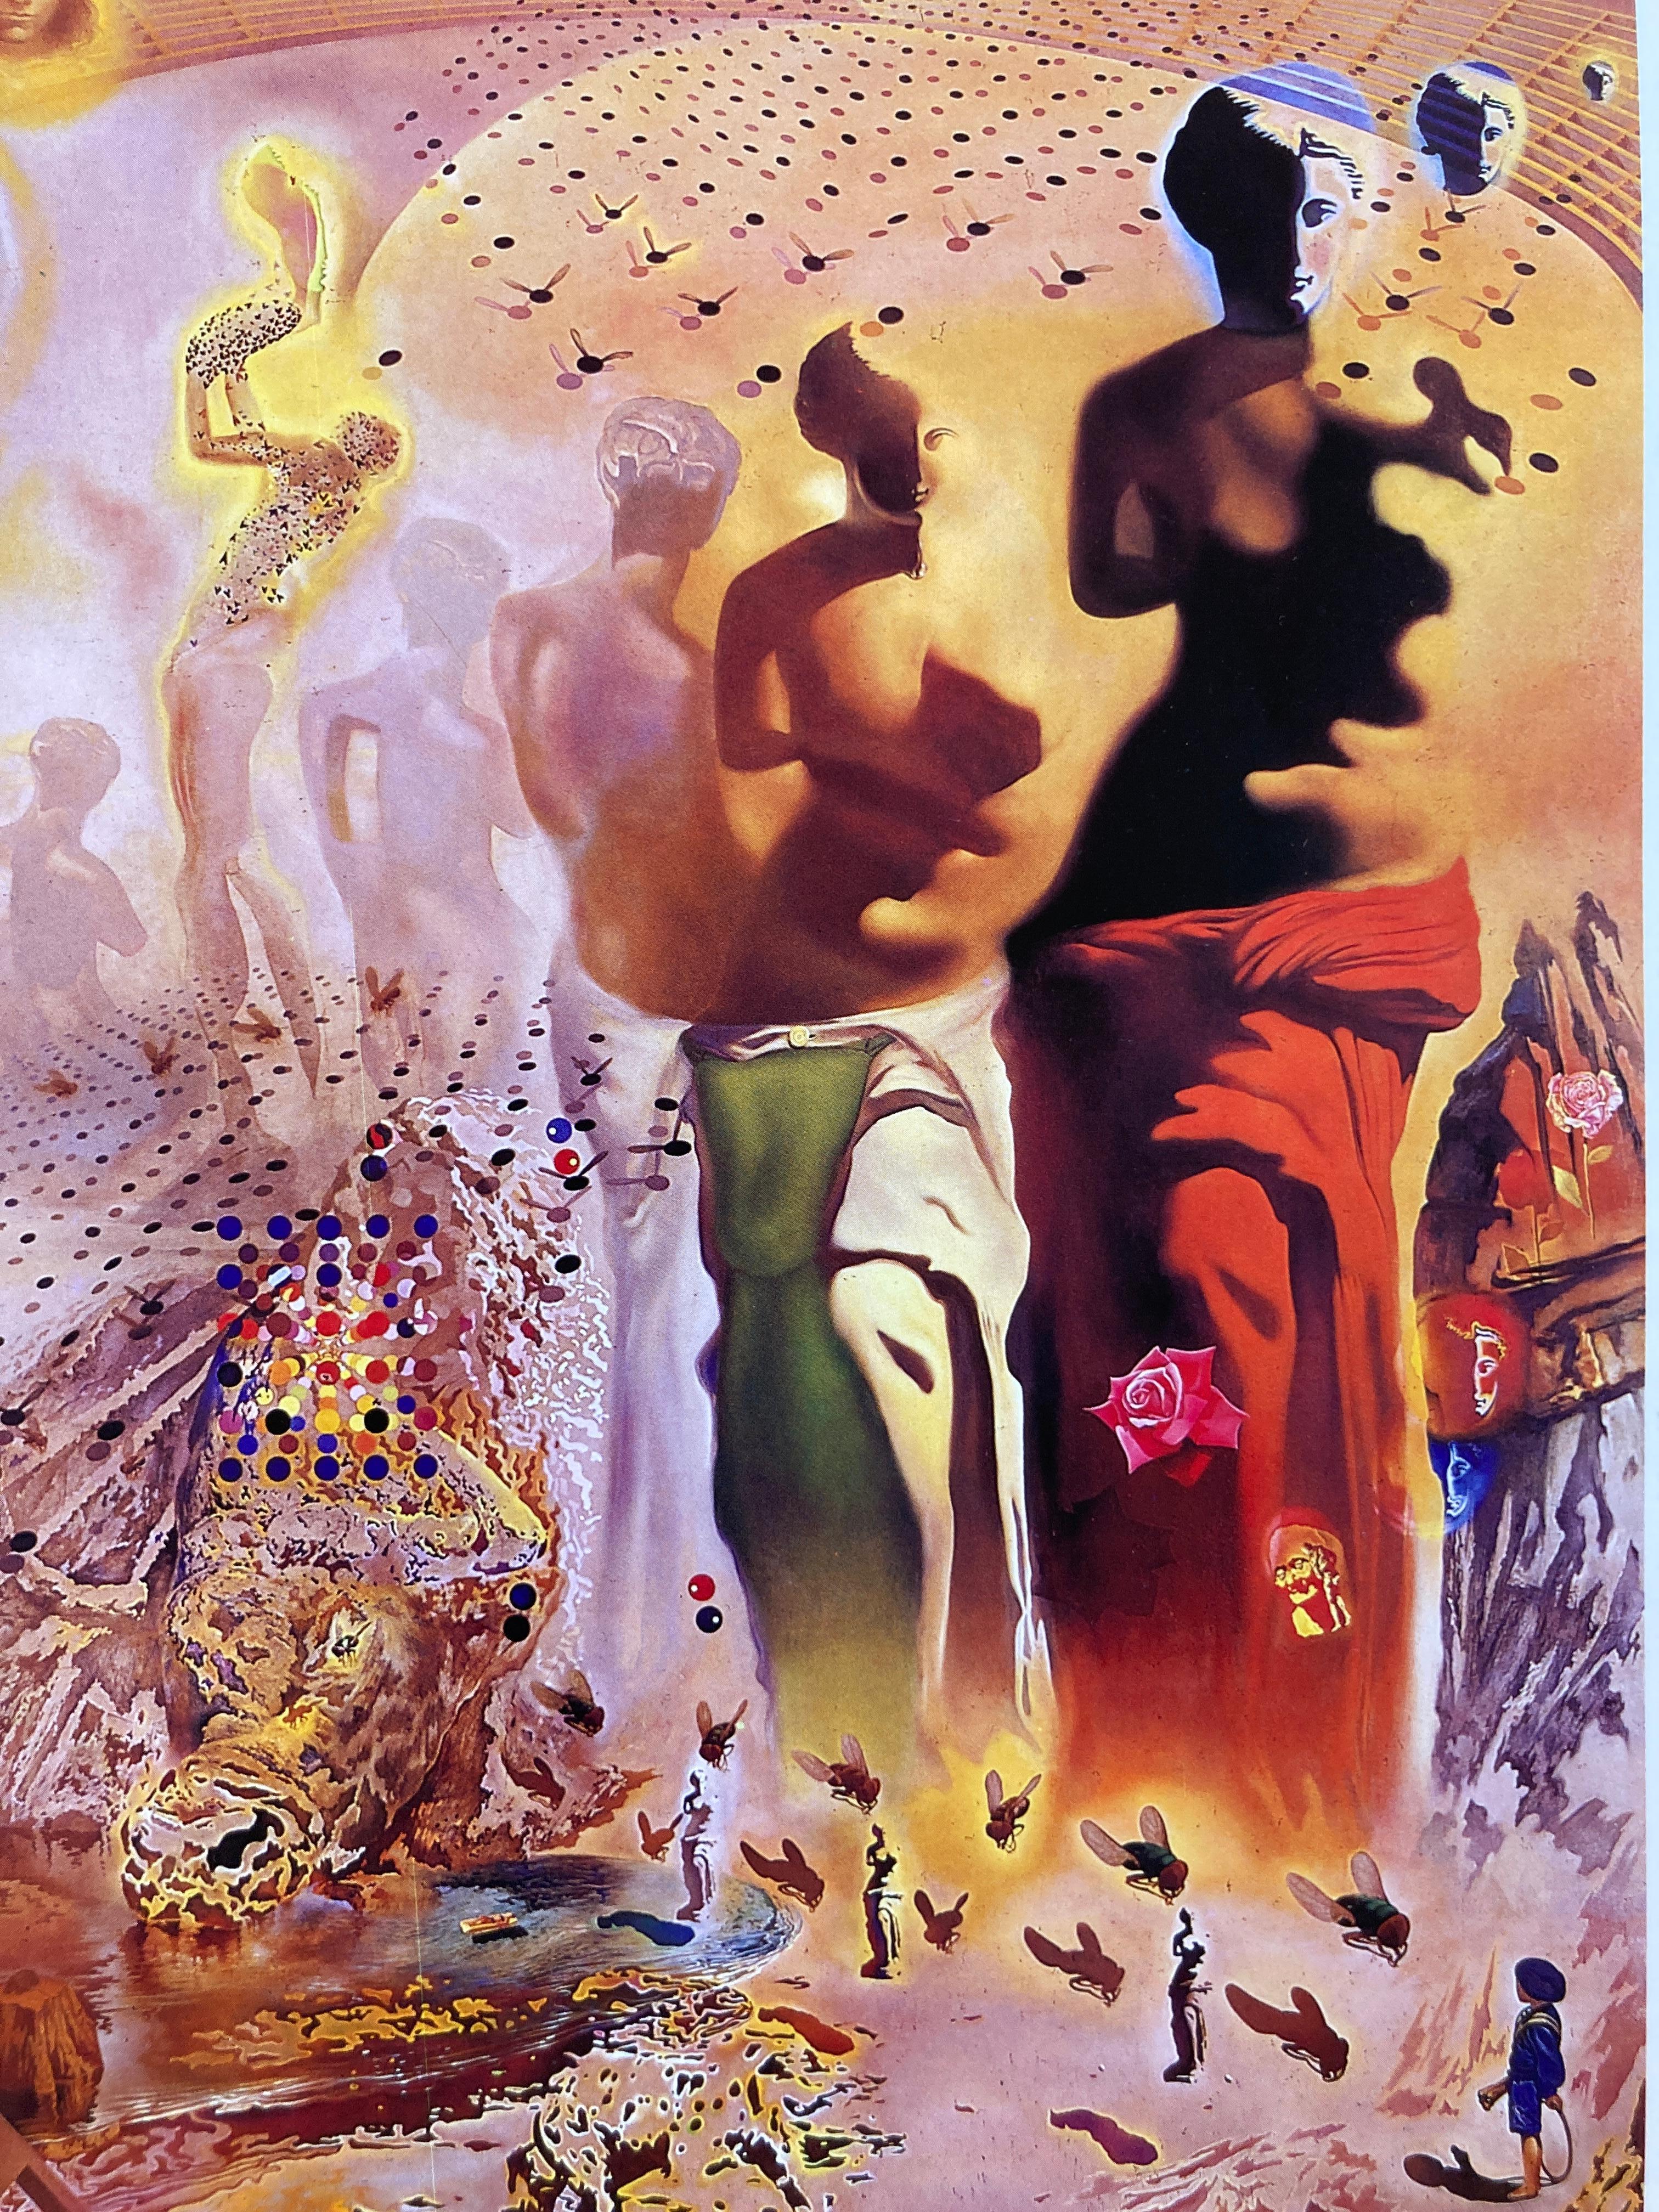 Post-Modern Dali The Work and the Man by Robert Descharnes Hardcover Coffee Table Art Book For Sale